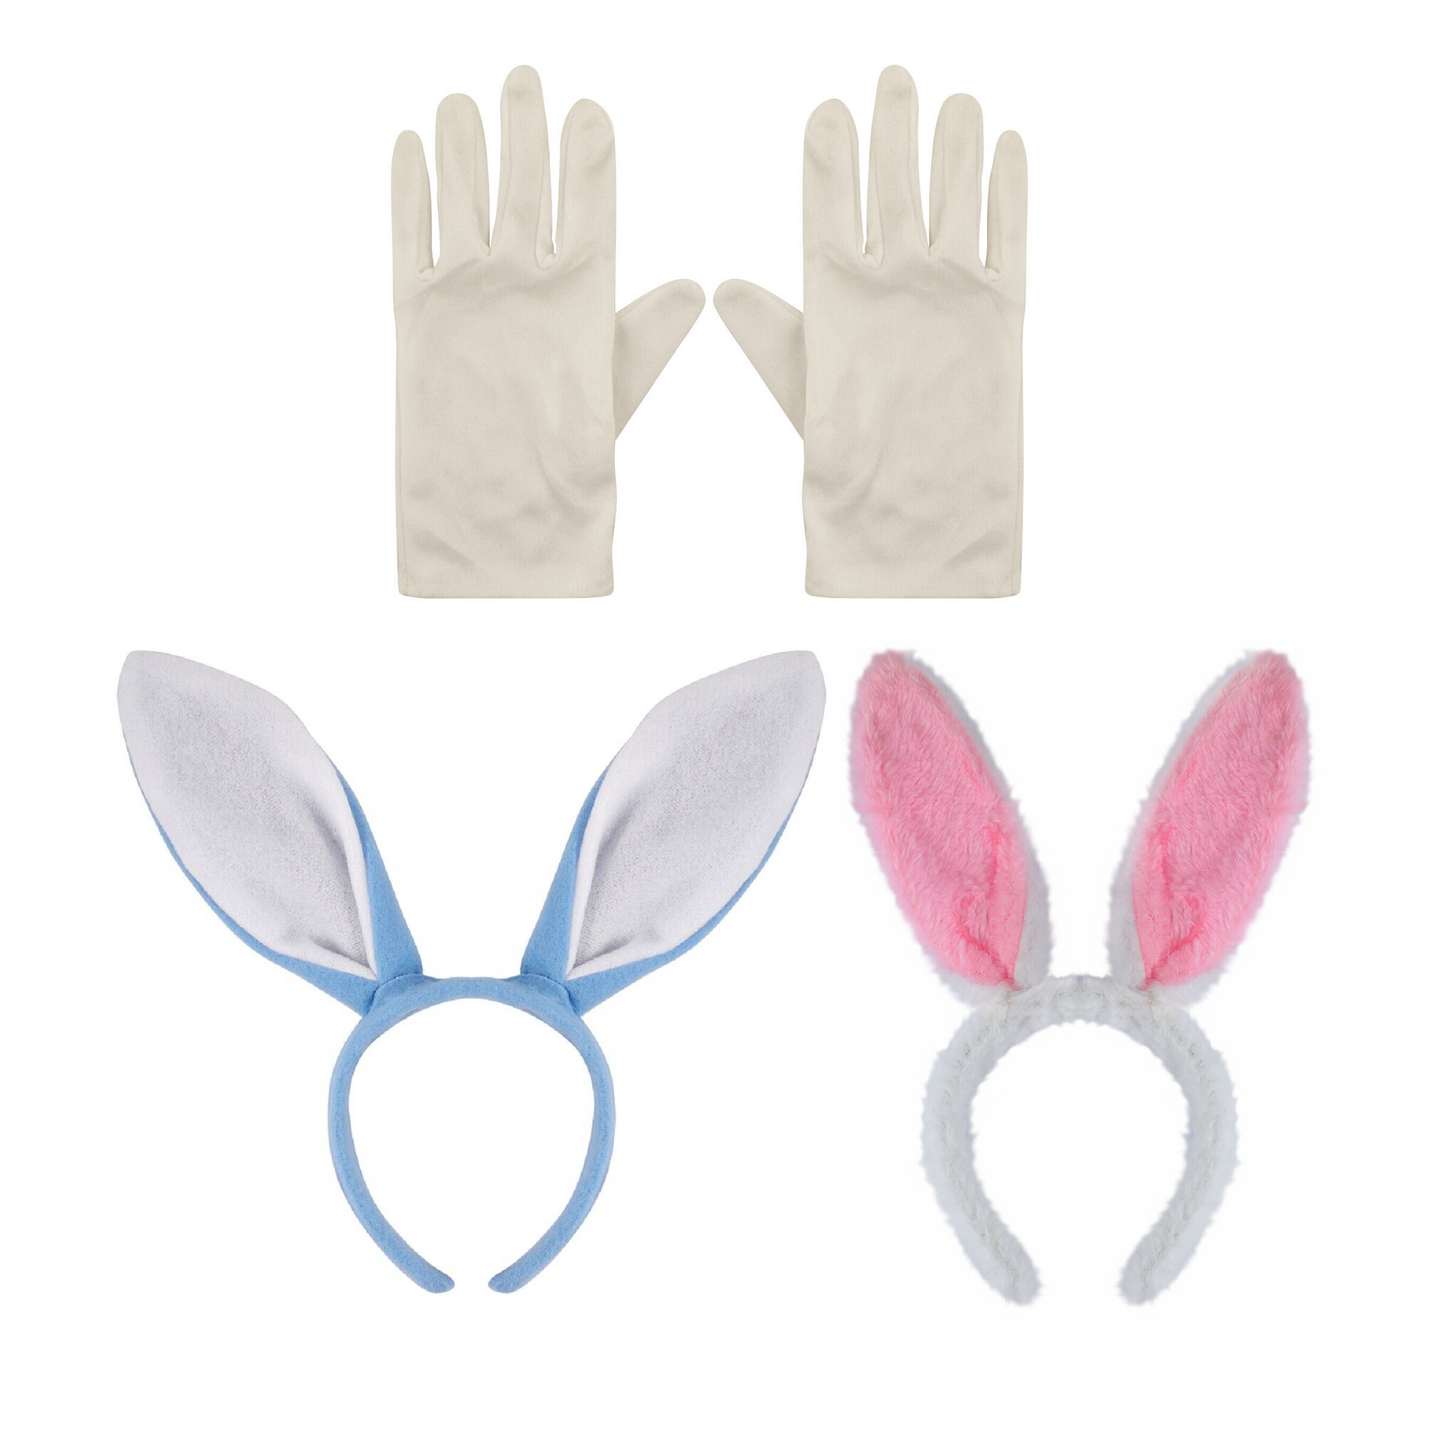 Kids Bunny Ears Blue Pink Headband and White Gloves Costume Sets